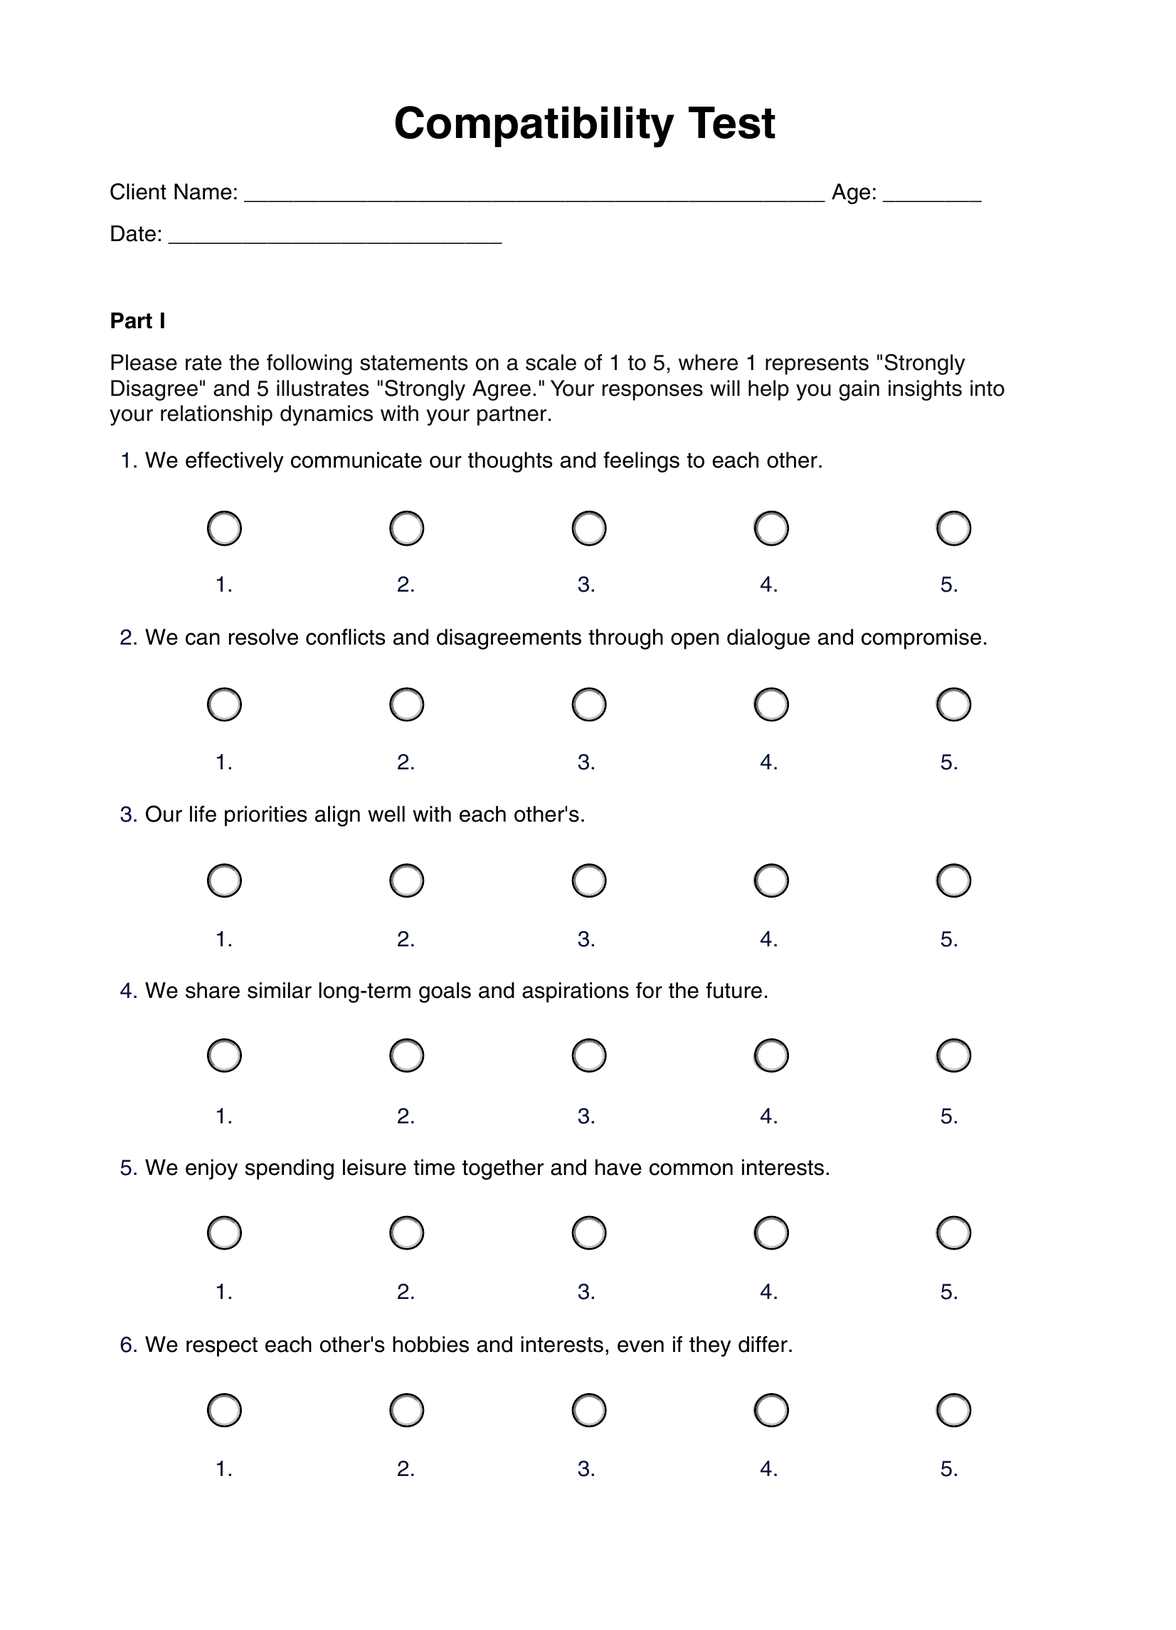 Compatibility Test PDF Example